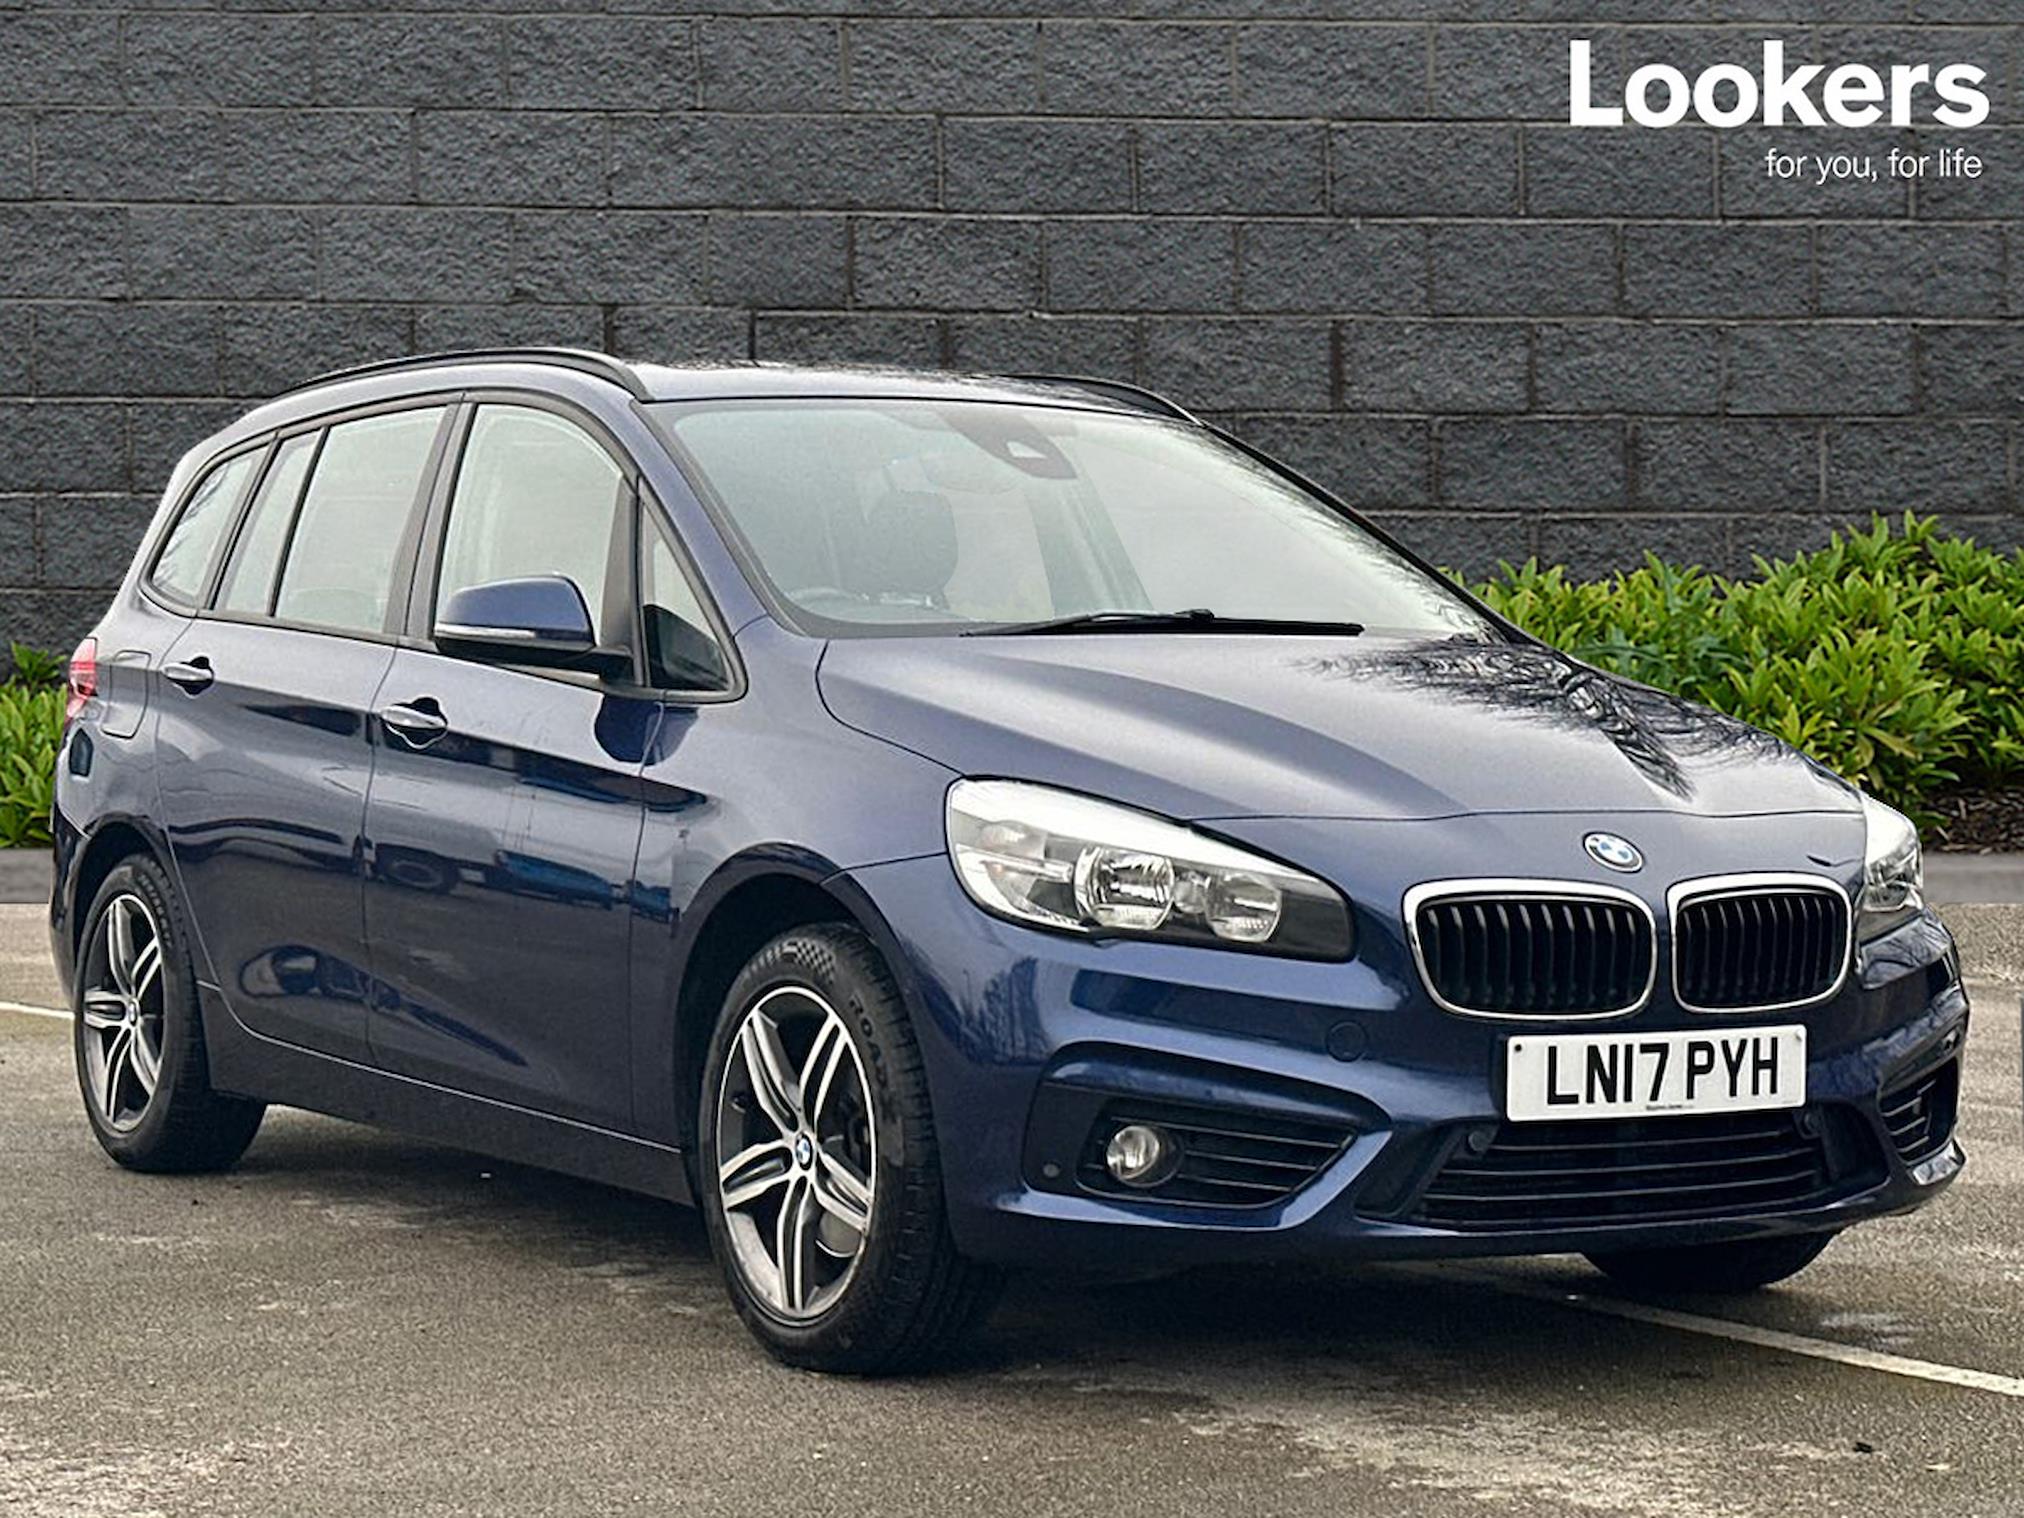 Used BMW 2 SERIES 218I Sport 5Dr Step Auto 2017 | Lookers